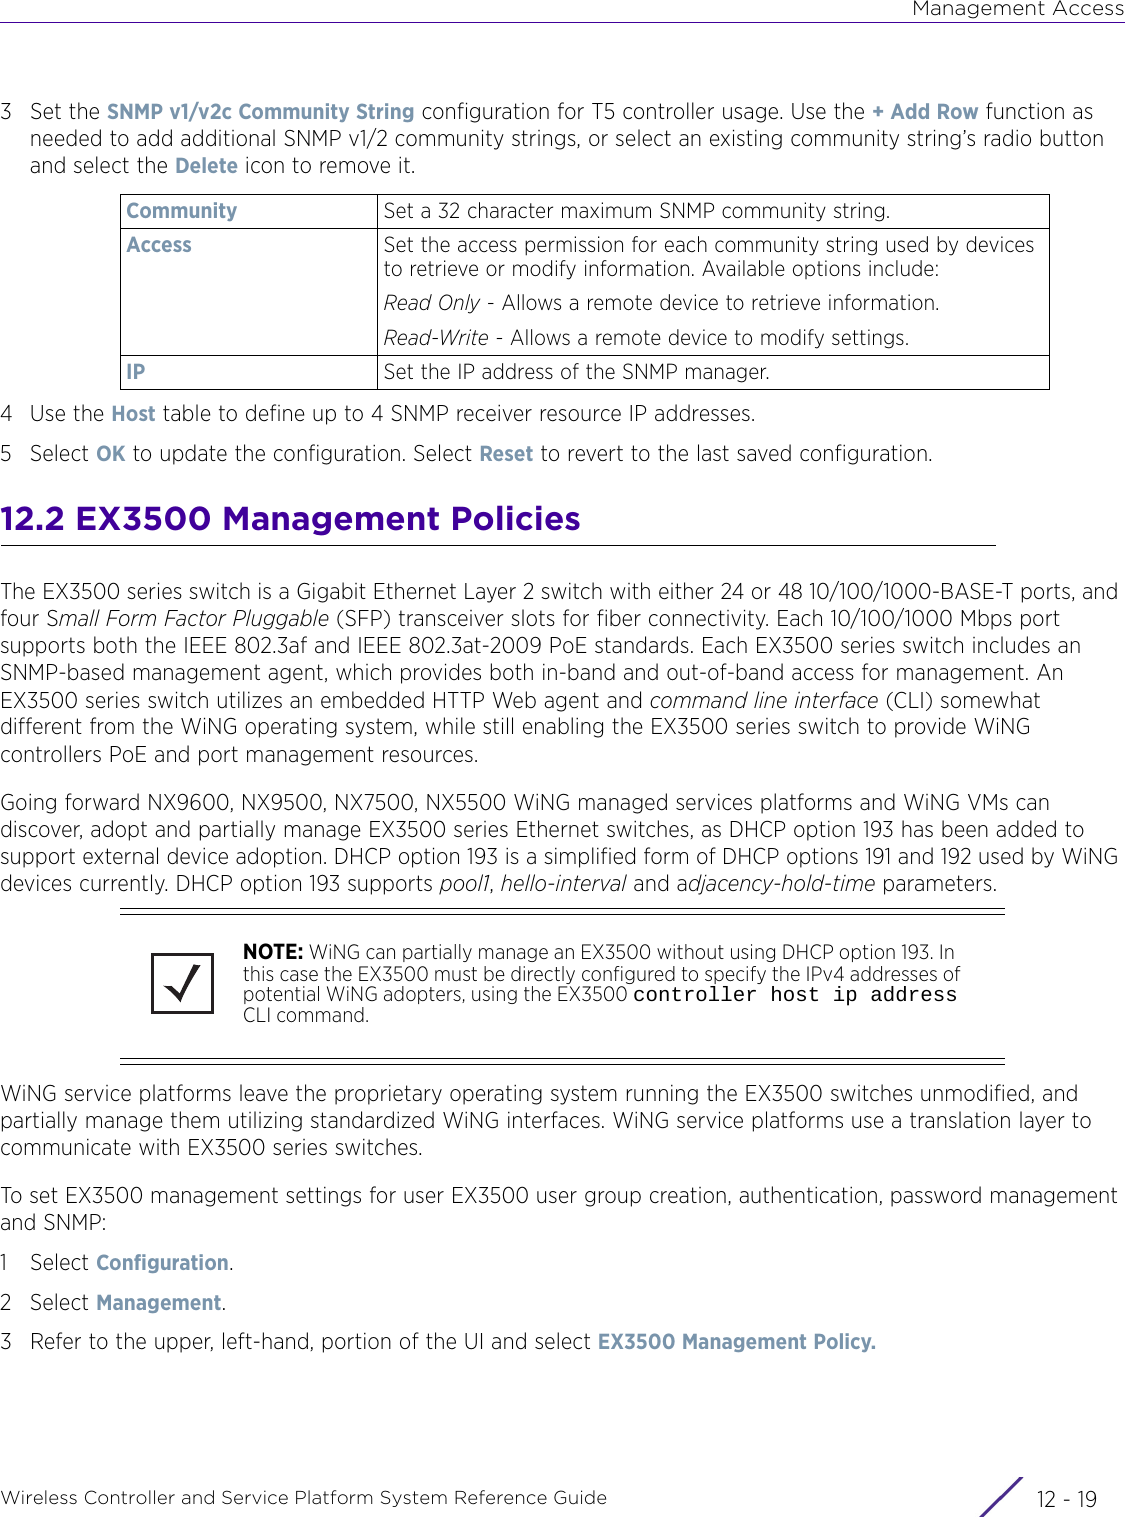 Management AccessWireless Controller and Service Platform System Reference Guide 12 - 193Set the SNMP v1/v2c Community String configuration for T5 controller usage. Use the + Add Row function as needed to add additional SNMP v1/2 community strings, or select an existing community string’s radio button and select the Delete icon to remove it.4Use the Host table to define up to 4 SNMP receiver resource IP addresses.5Select OK to update the configuration. Select Reset to revert to the last saved configuration.12.2 EX3500 Management Policies The EX3500 series switch is a Gigabit Ethernet Layer 2 switch with either 24 or 48 10/100/1000-BASE-T ports, and four Small Form Factor Pluggable (SFP) transceiver slots for fiber connectivity. Each 10/100/1000 Mbps port supports both the IEEE 802.3af and IEEE 802.3at-2009 PoE standards. Each EX3500 series switch includes an SNMP-based management agent, which provides both in-band and out-of-band access for management. An EX3500 series switch utilizes an embedded HTTP Web agent and command line interface (CLI) somewhat different from the WiNG operating system, while still enabling the EX3500 series switch to provide WiNG controllers PoE and port management resources.Going forward NX9600, NX9500, NX7500, NX5500 WiNG managed services platforms and WiNG VMs can discover, adopt and partially manage EX3500 series Ethernet switches, as DHCP option 193 has been added to support external device adoption. DHCP option 193 is a simplified form of DHCP options 191 and 192 used by WiNG devices currently. DHCP option 193 supports pool1, hello-interval and adjacency-hold-time parameters. WiNG service platforms leave the proprietary operating system running the EX3500 switches unmodified, and partially manage them utilizing standardized WiNG interfaces. WiNG service platforms use a translation layer to communicate with EX3500 series switches.To set EX3500 management settings for user EX3500 user group creation, authentication, password management and SNMP:1Select Configuration. 2Select Management.3 Refer to the upper, left-hand, portion of the UI and select EX3500 Management Policy.Community Set a 32 character maximum SNMP community string.Access Set the access permission for each community string used by devices to retrieve or modify information. Available options include:Read Only - Allows a remote device to retrieve information. Read-Write - Allows a remote device to modify settings.IP Set the IP address of the SNMP manager.NOTE: WiNG can partially manage an EX3500 without using DHCP option 193. In this case the EX3500 must be directly configured to specify the IPv4 addresses of potential WiNG adopters, using the EX3500 controller host ip address CLI command.